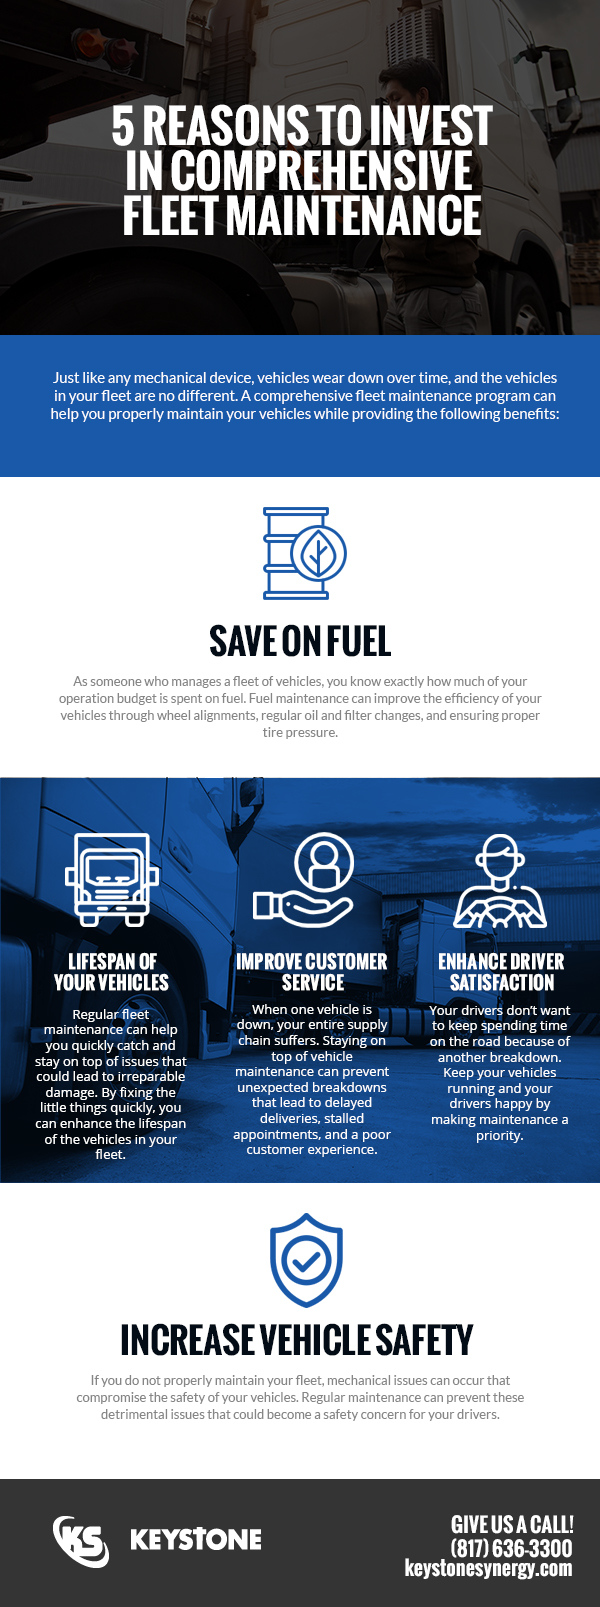 5 Reasons to Invest in Comprehensive Fleet Maintenance [infographic]